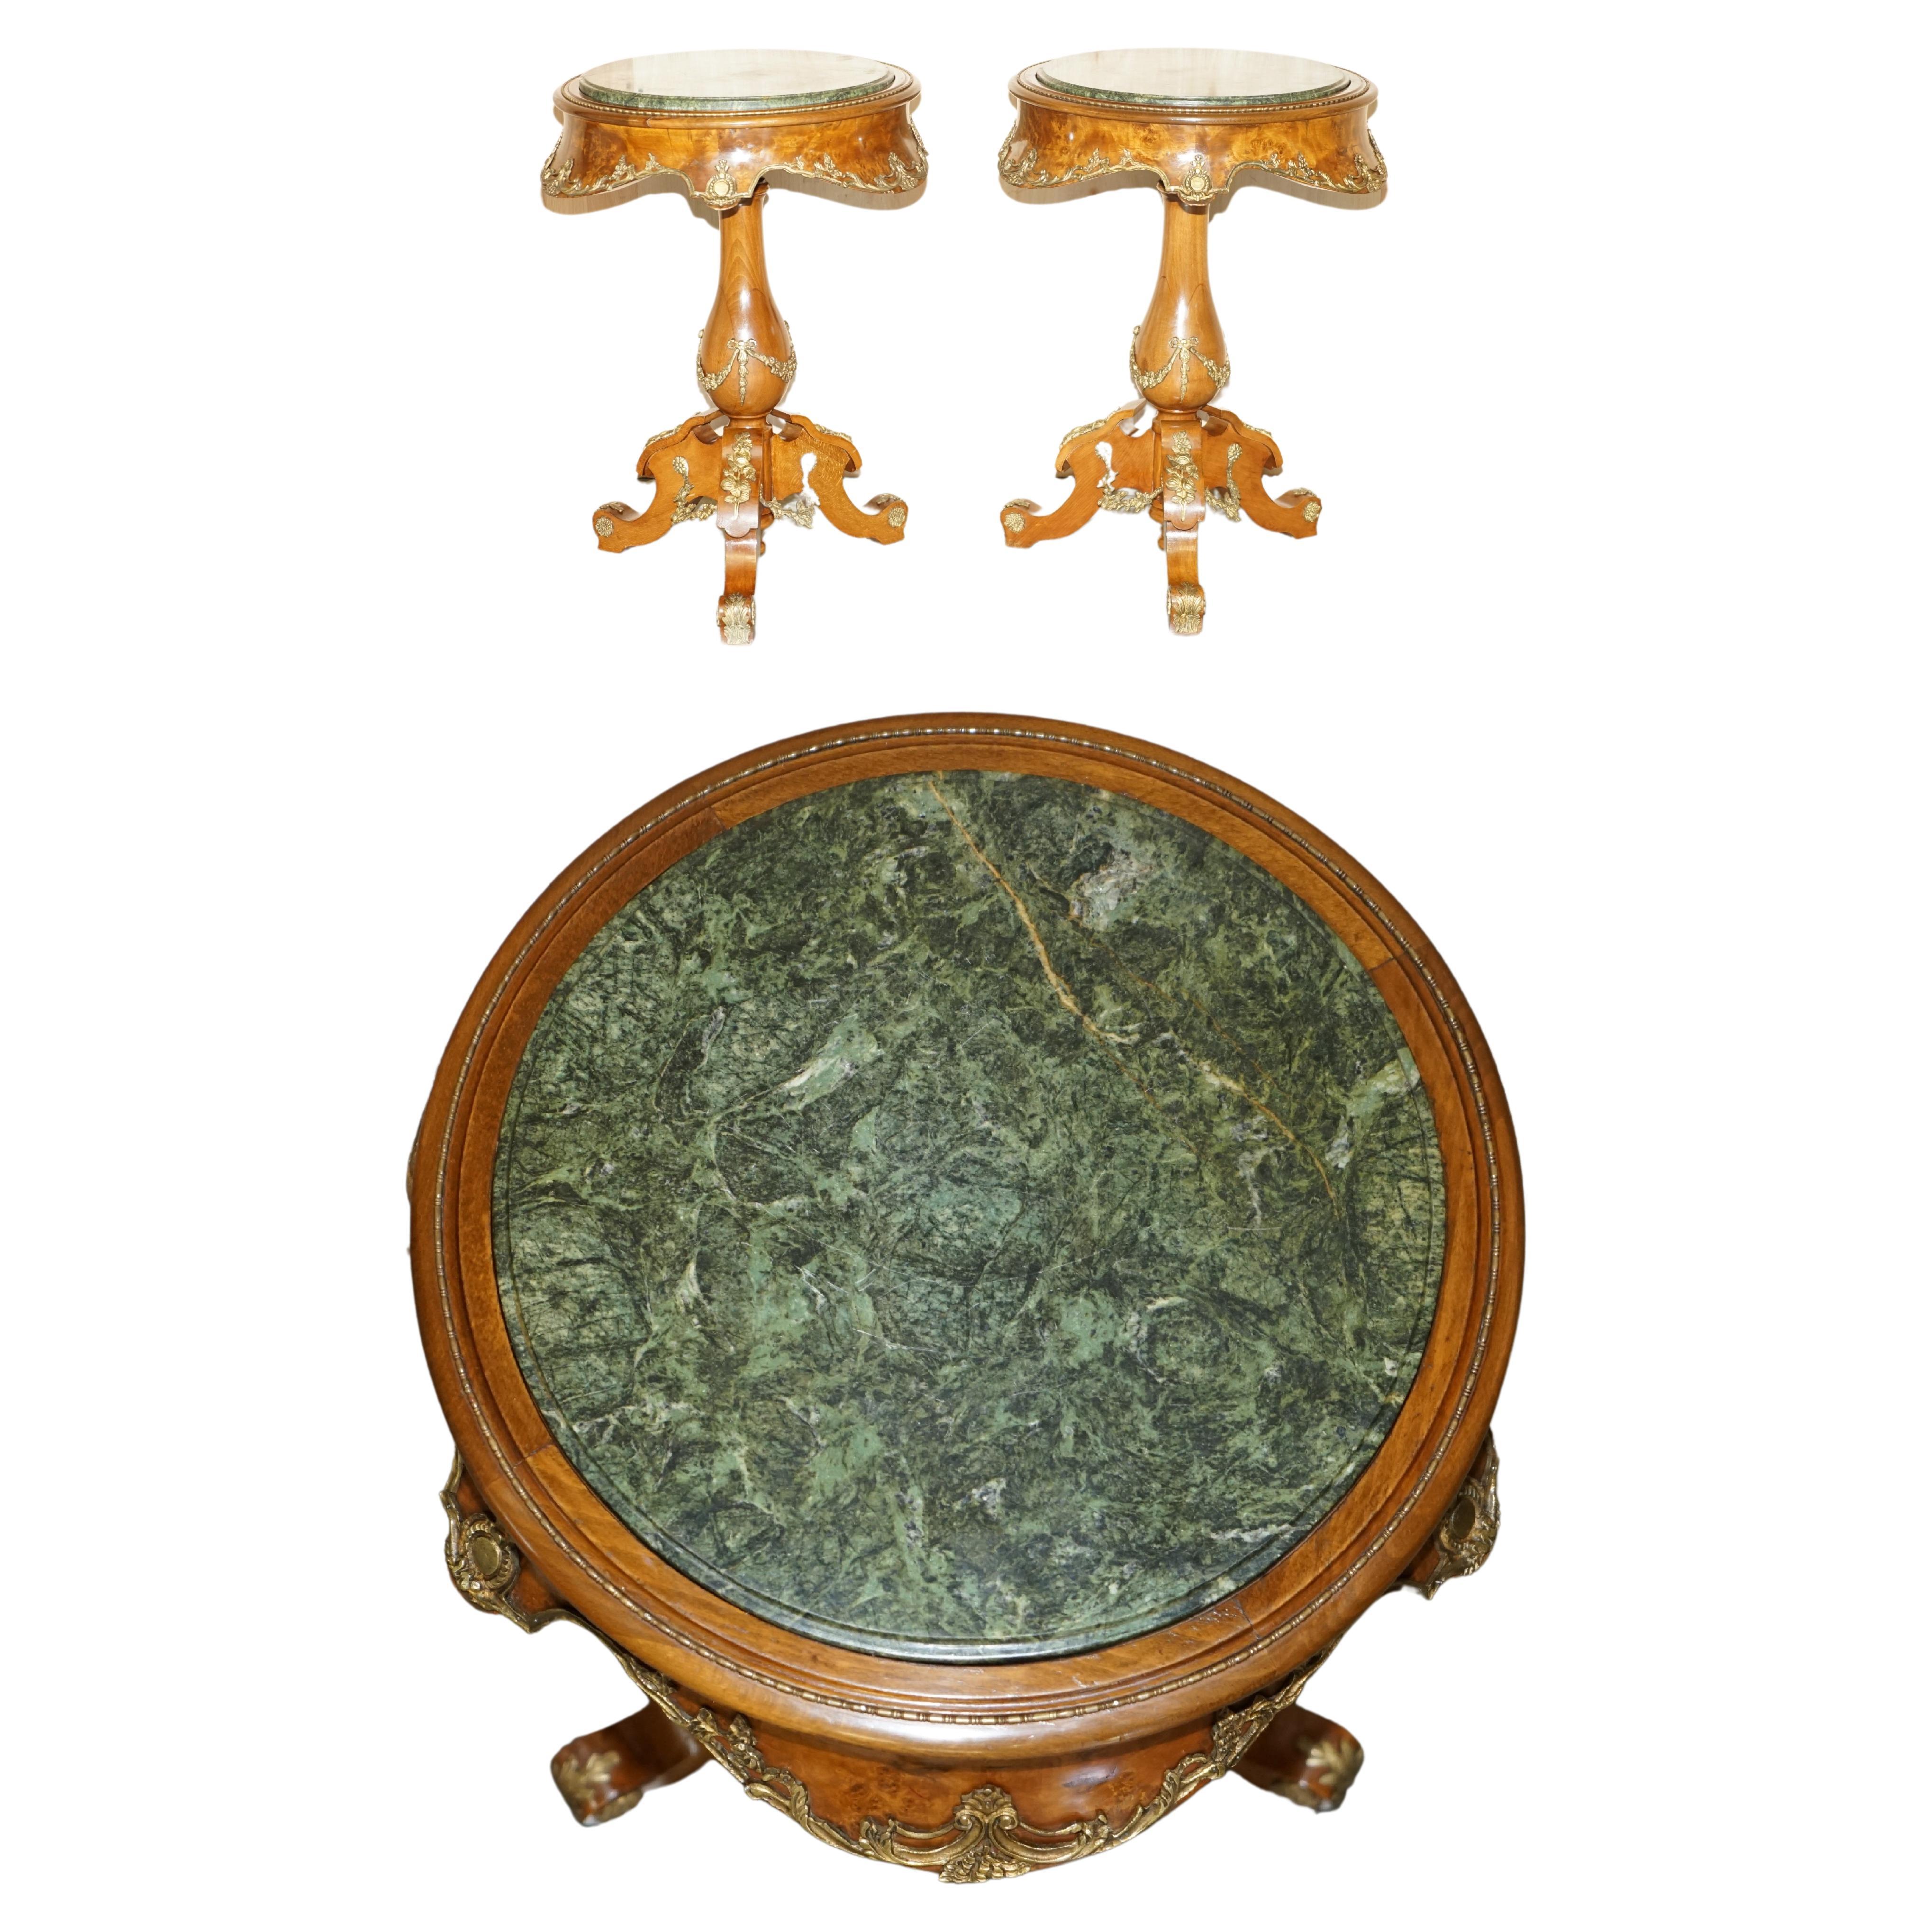 PAIR OF ANTIQUE FRENCH 1880 BURR WALNUT, GILT BRASS GRÜNE MARBLE SIDE END TABLEs